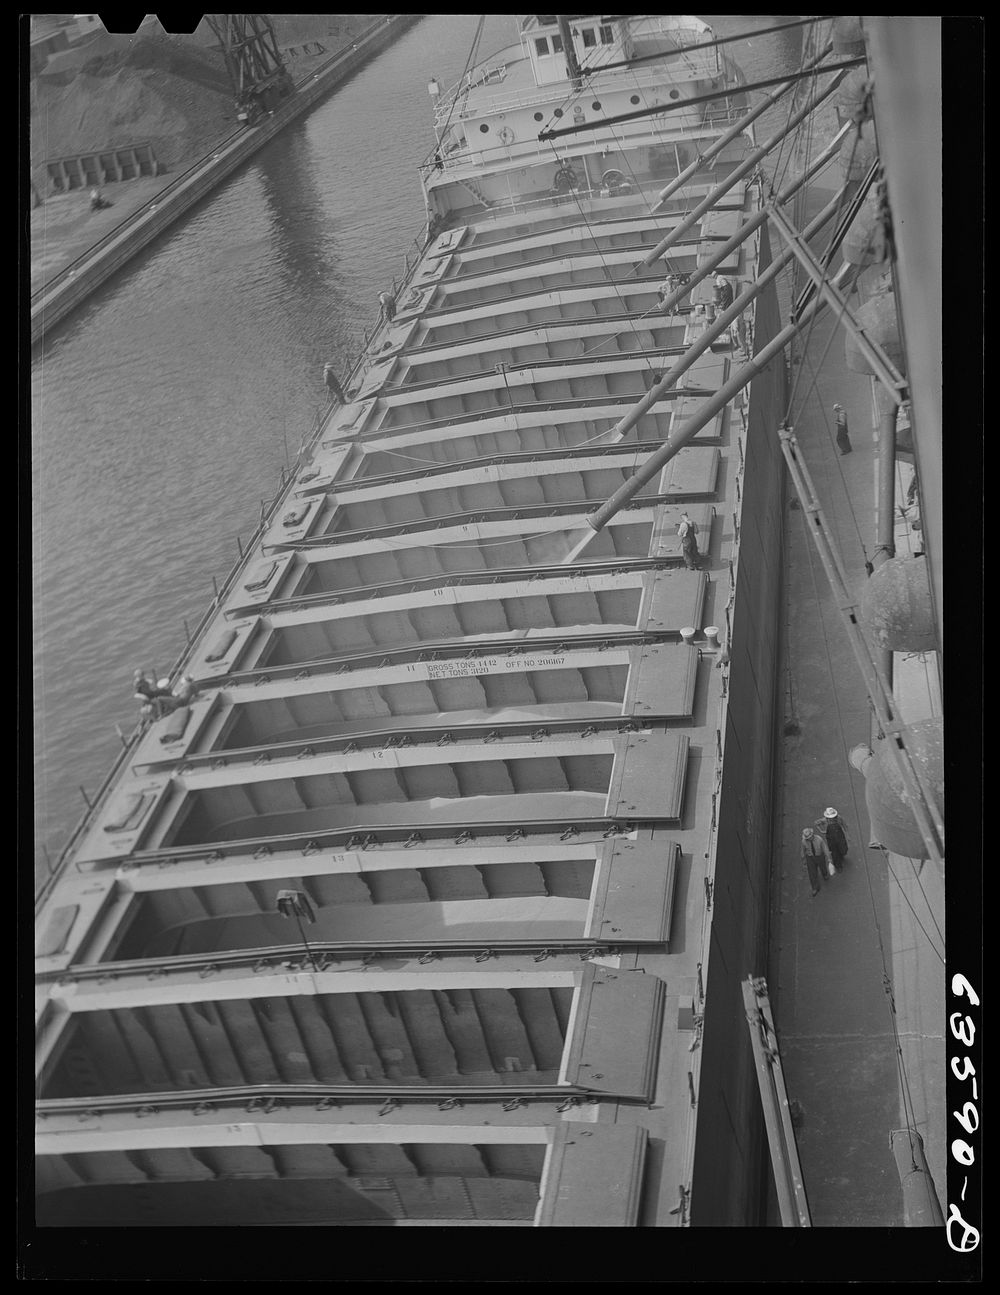 Loading grain boat. Occident elevator. Duluth, Minnesota. Sourced from the Library of Congress.